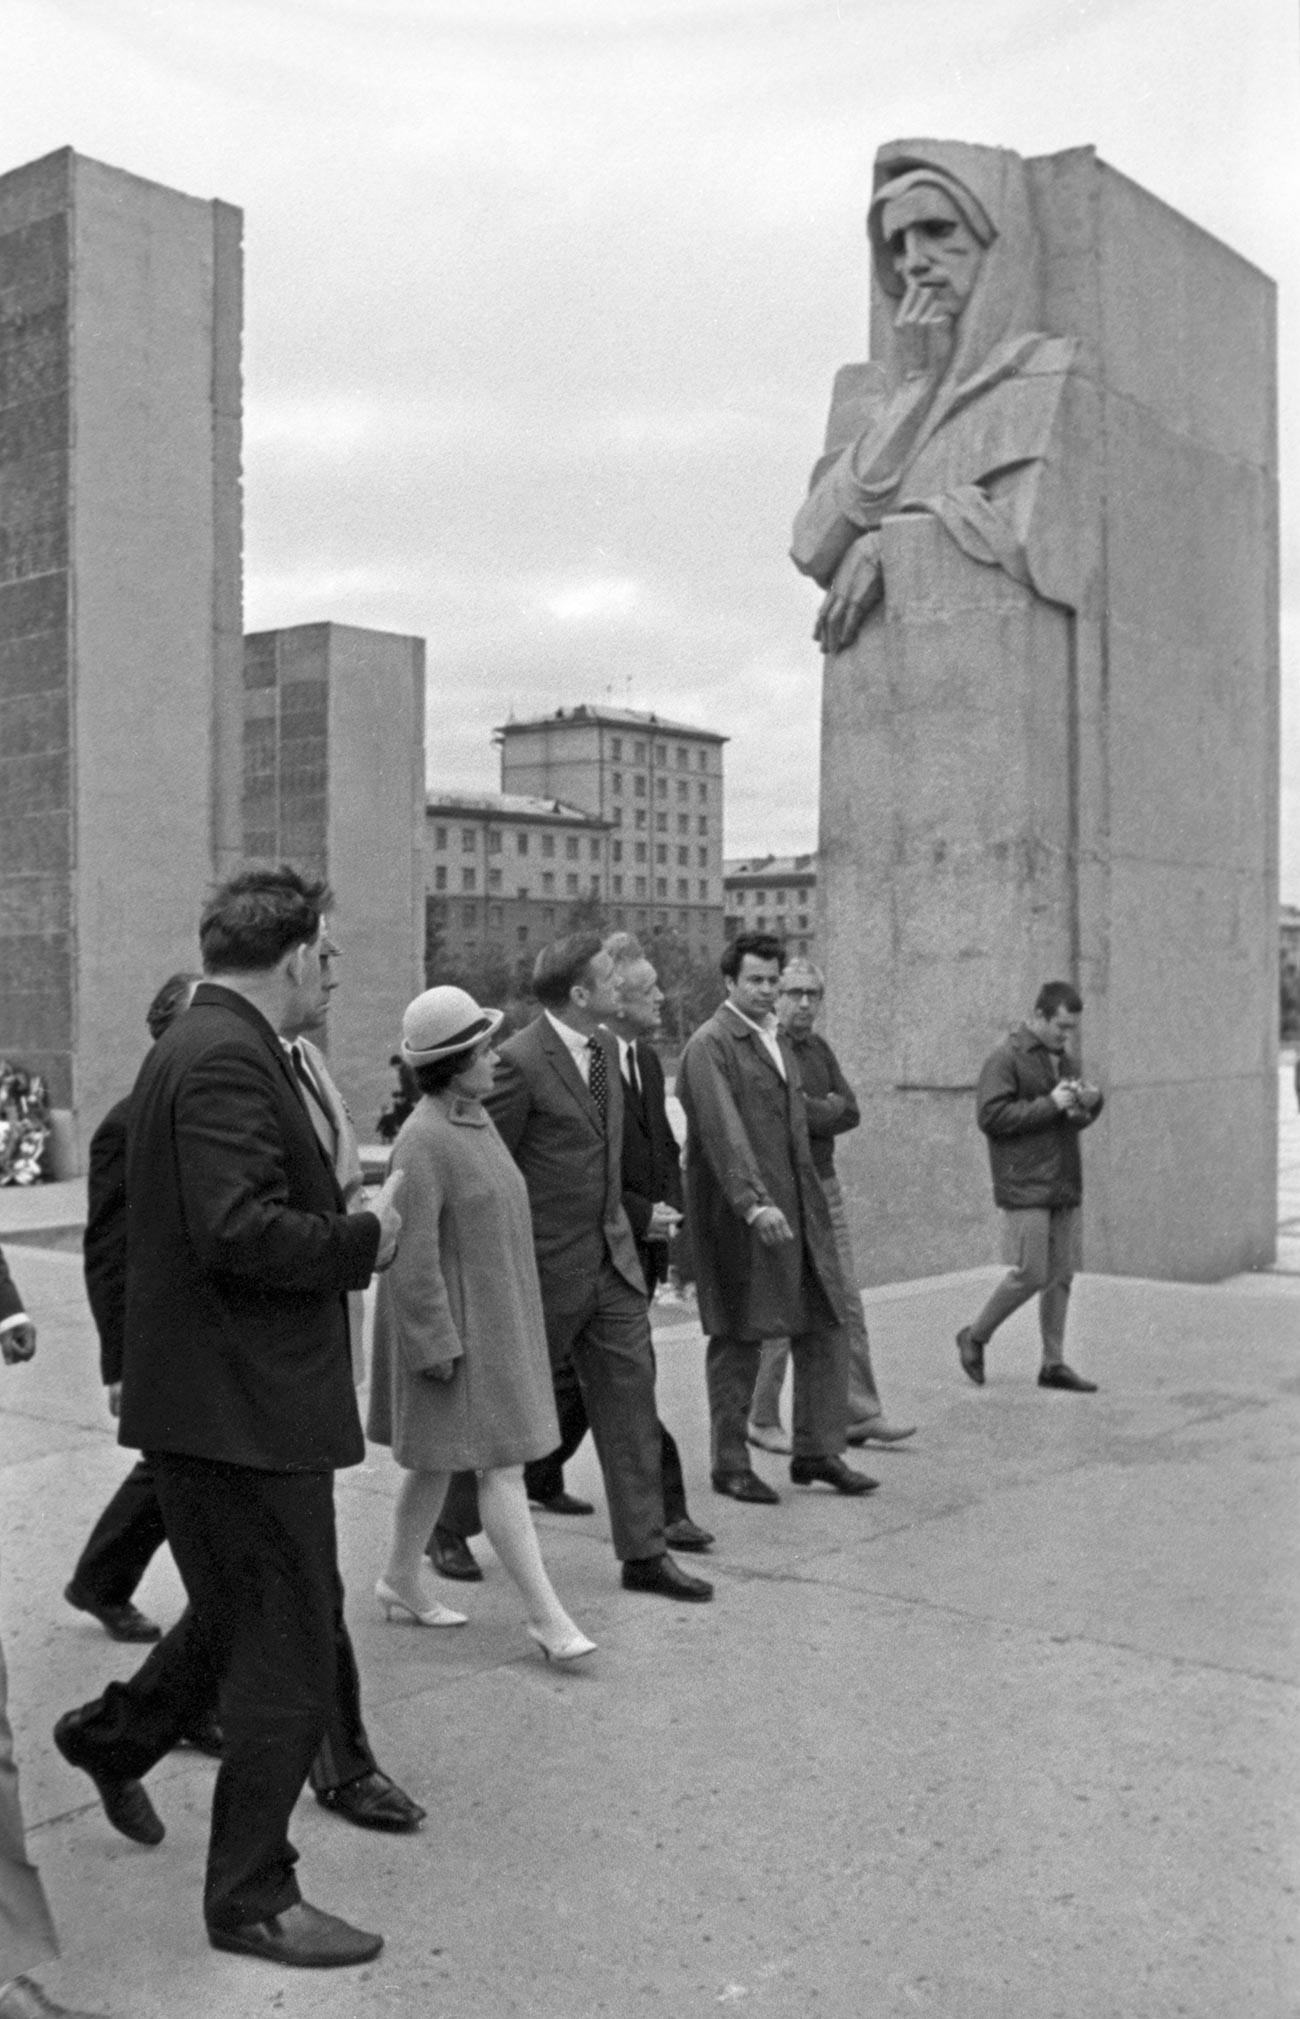 Armstrong visits the Glory Monument memorial complex, Novosibirsk.